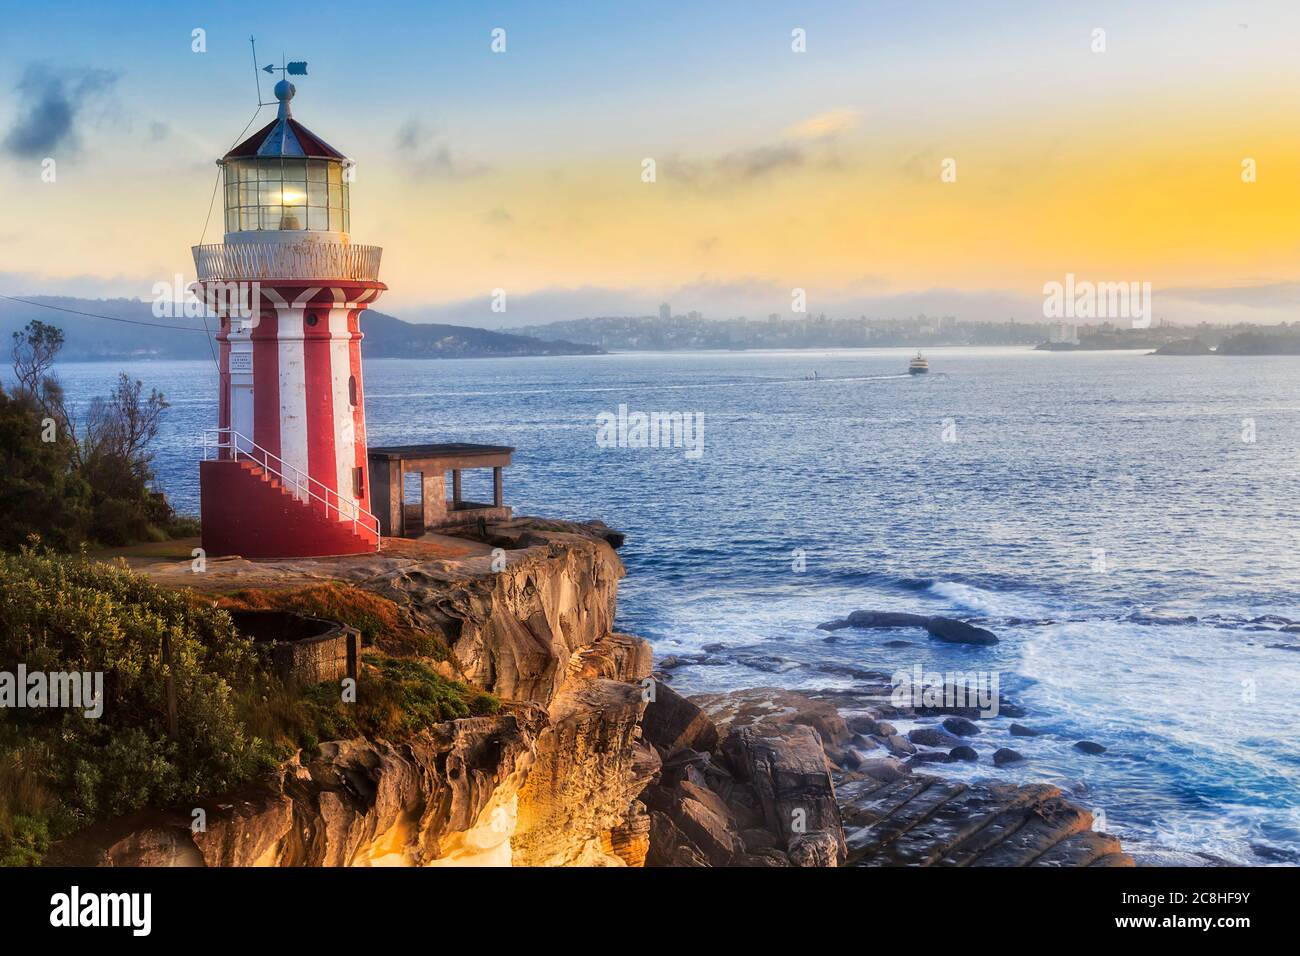 Hornby lighthouse and ferry from Sydney to Manly at sunrise on the edge of sandstone rock near Sydnay harbour entrance. Stock Photo